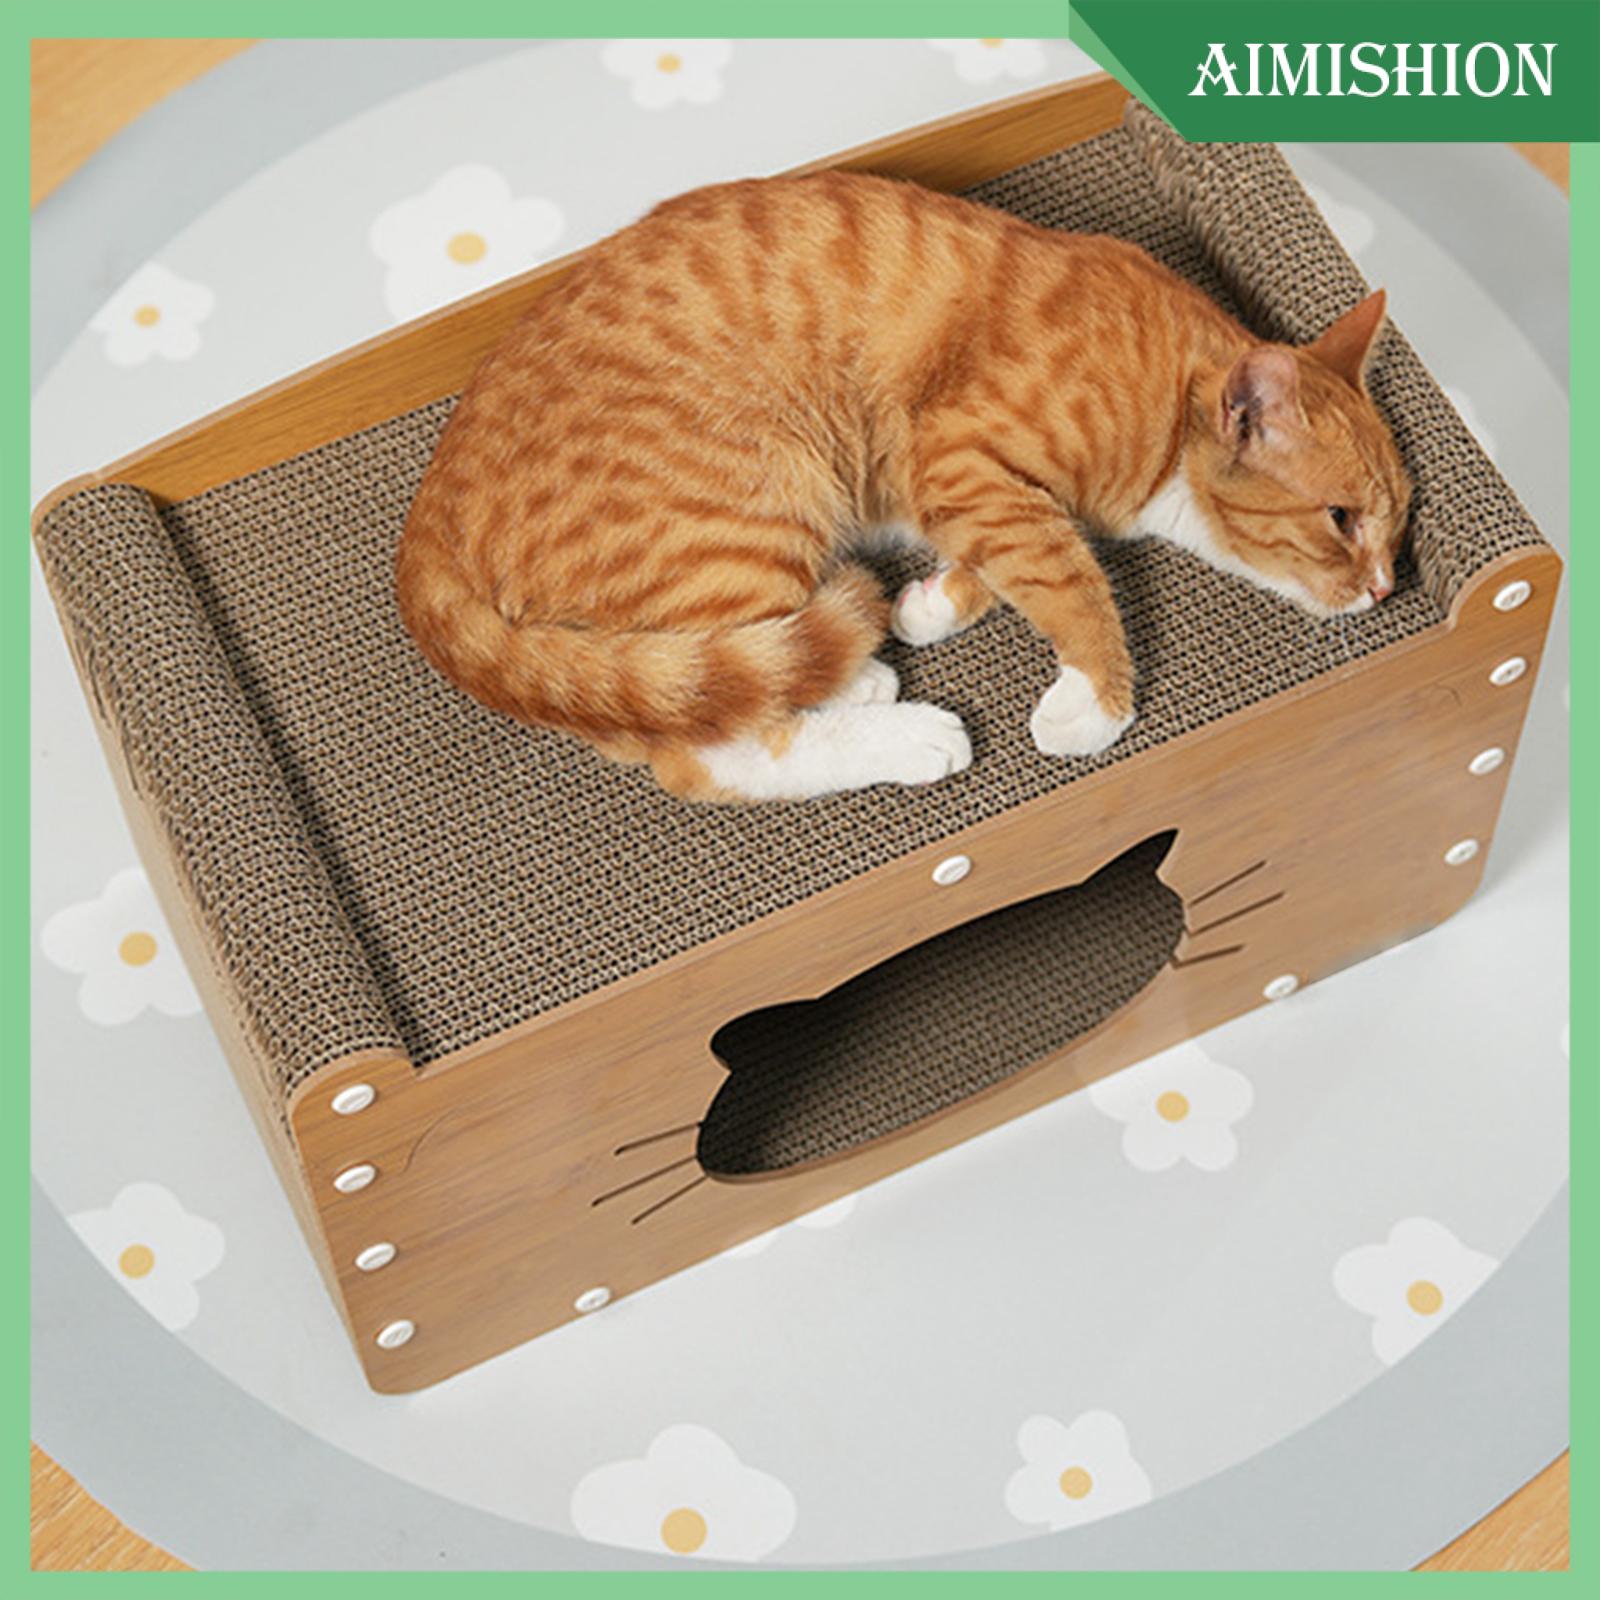 Aimishion Cat Scratch House Durable Multifunctional with Entrance Cat